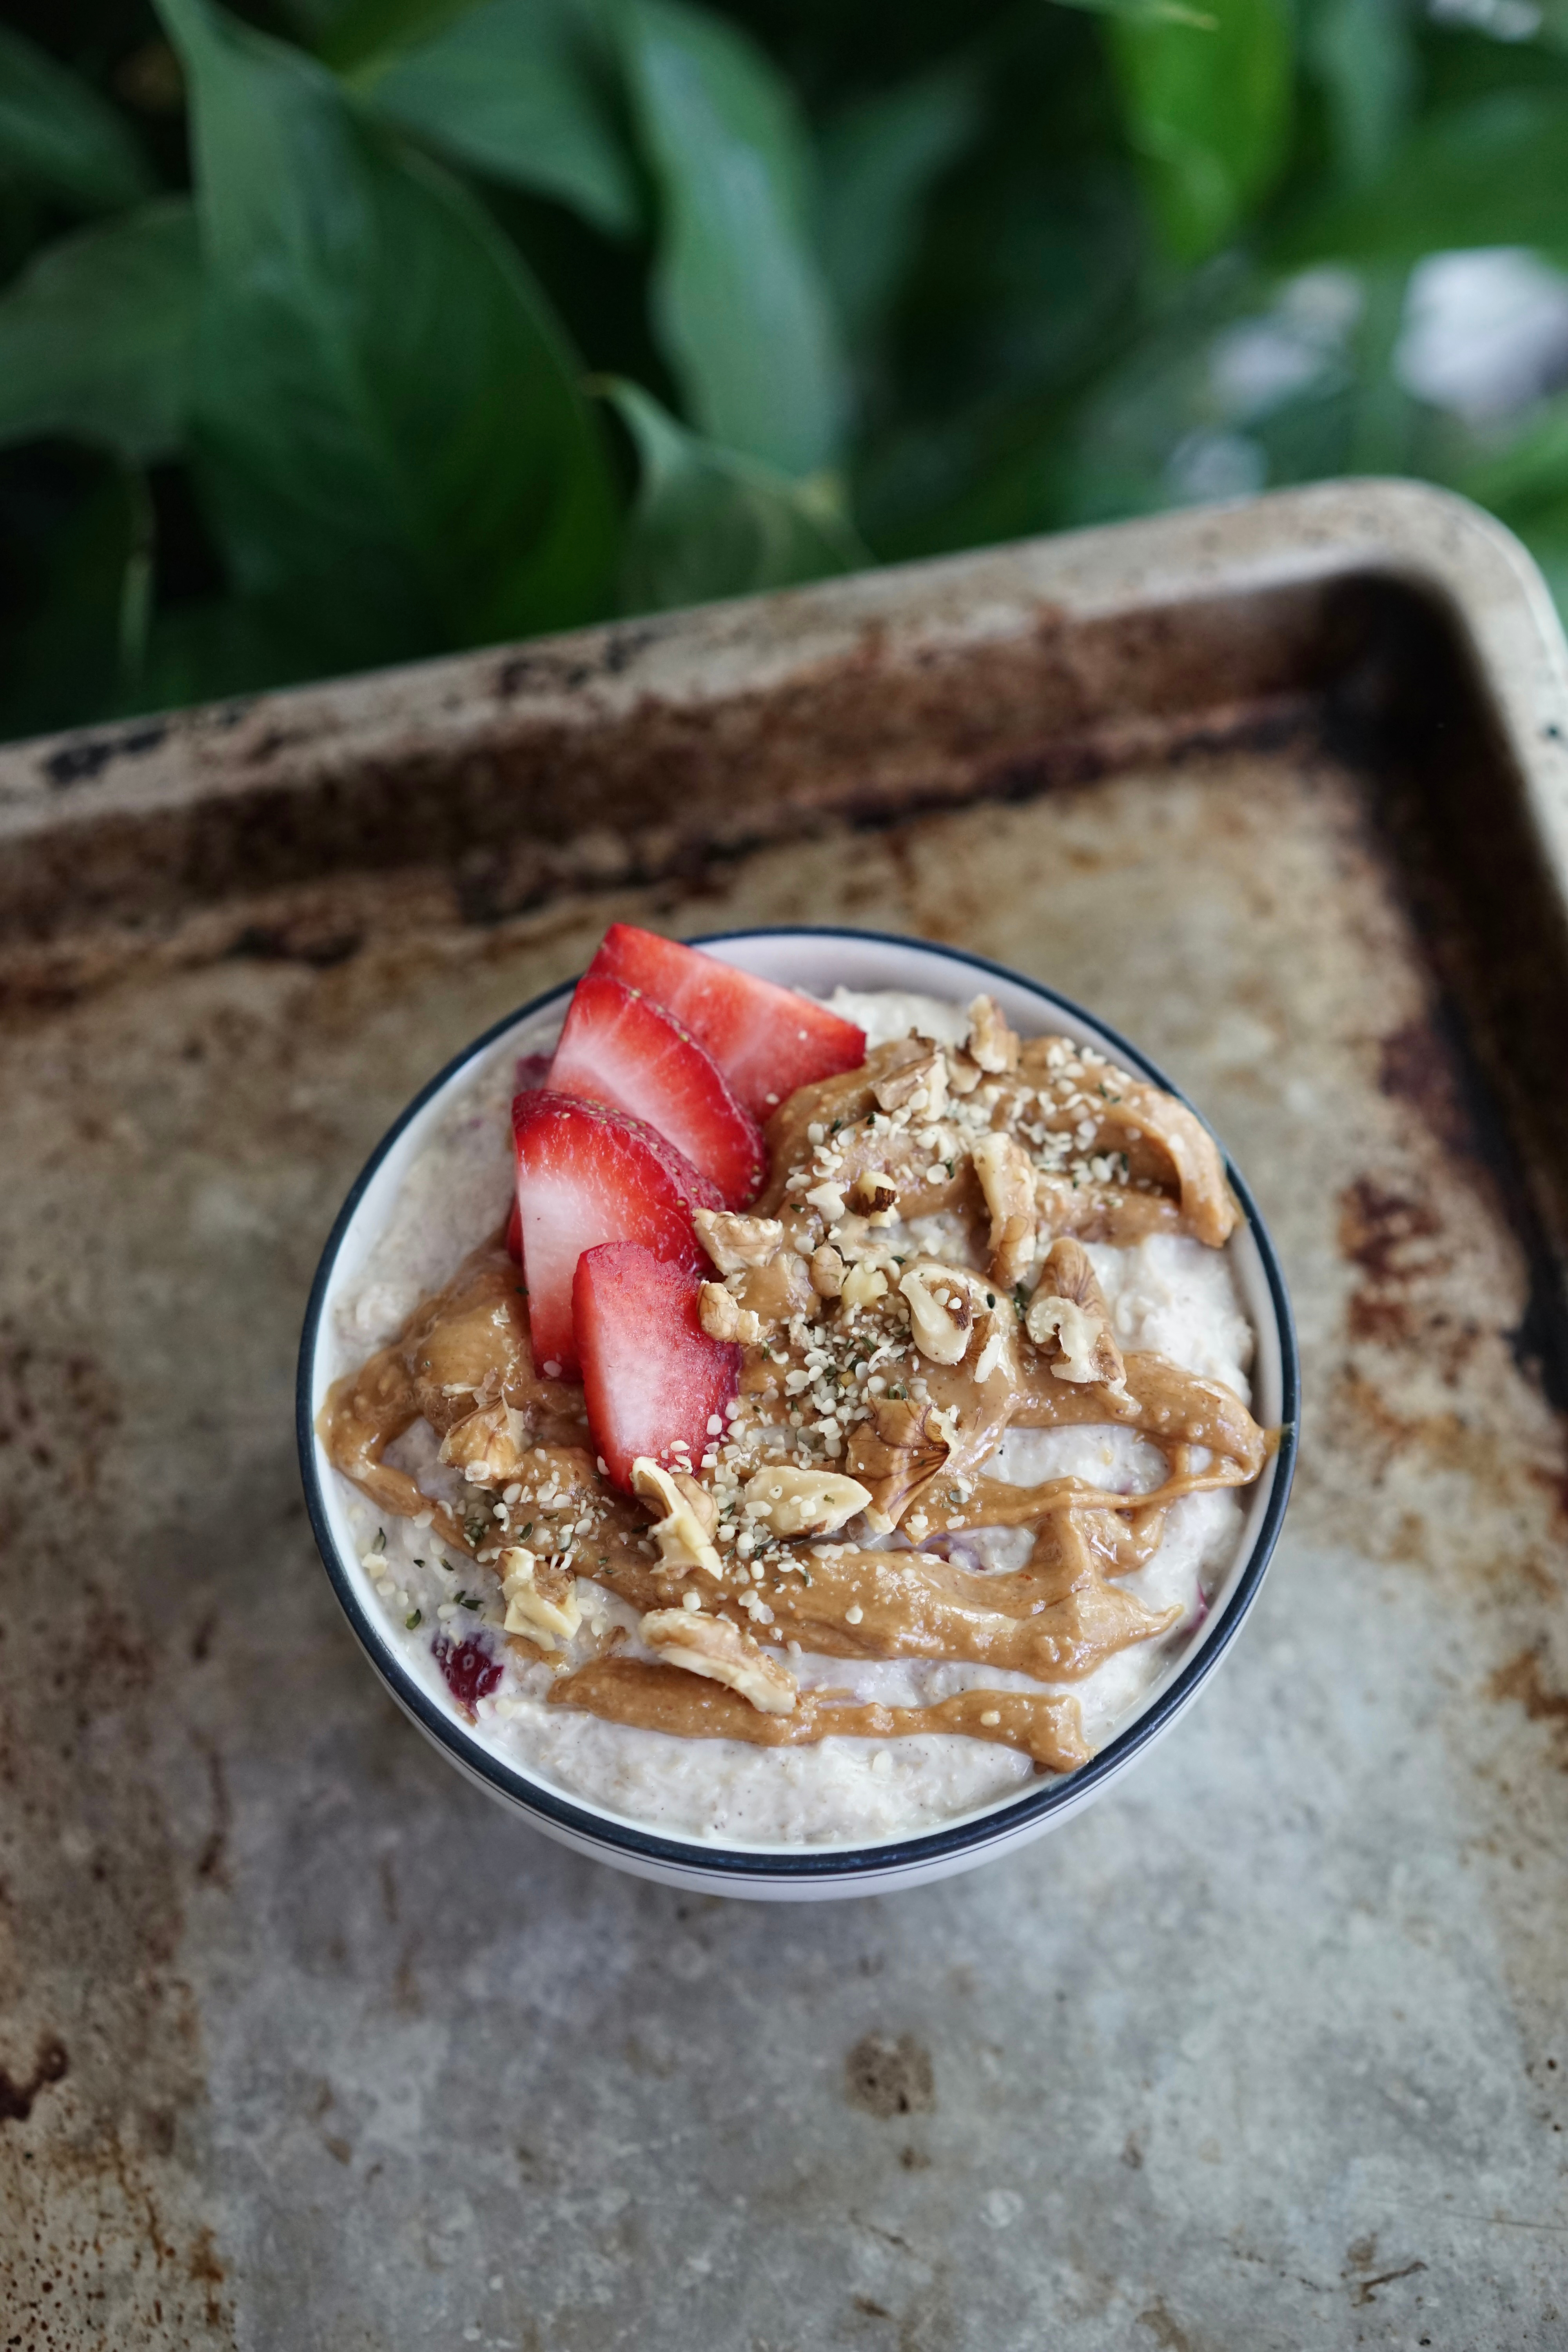 Strawberry Shredded Wheat Porridge with Maple Peanut Butter Drizzle | Living Healthy in Seattle